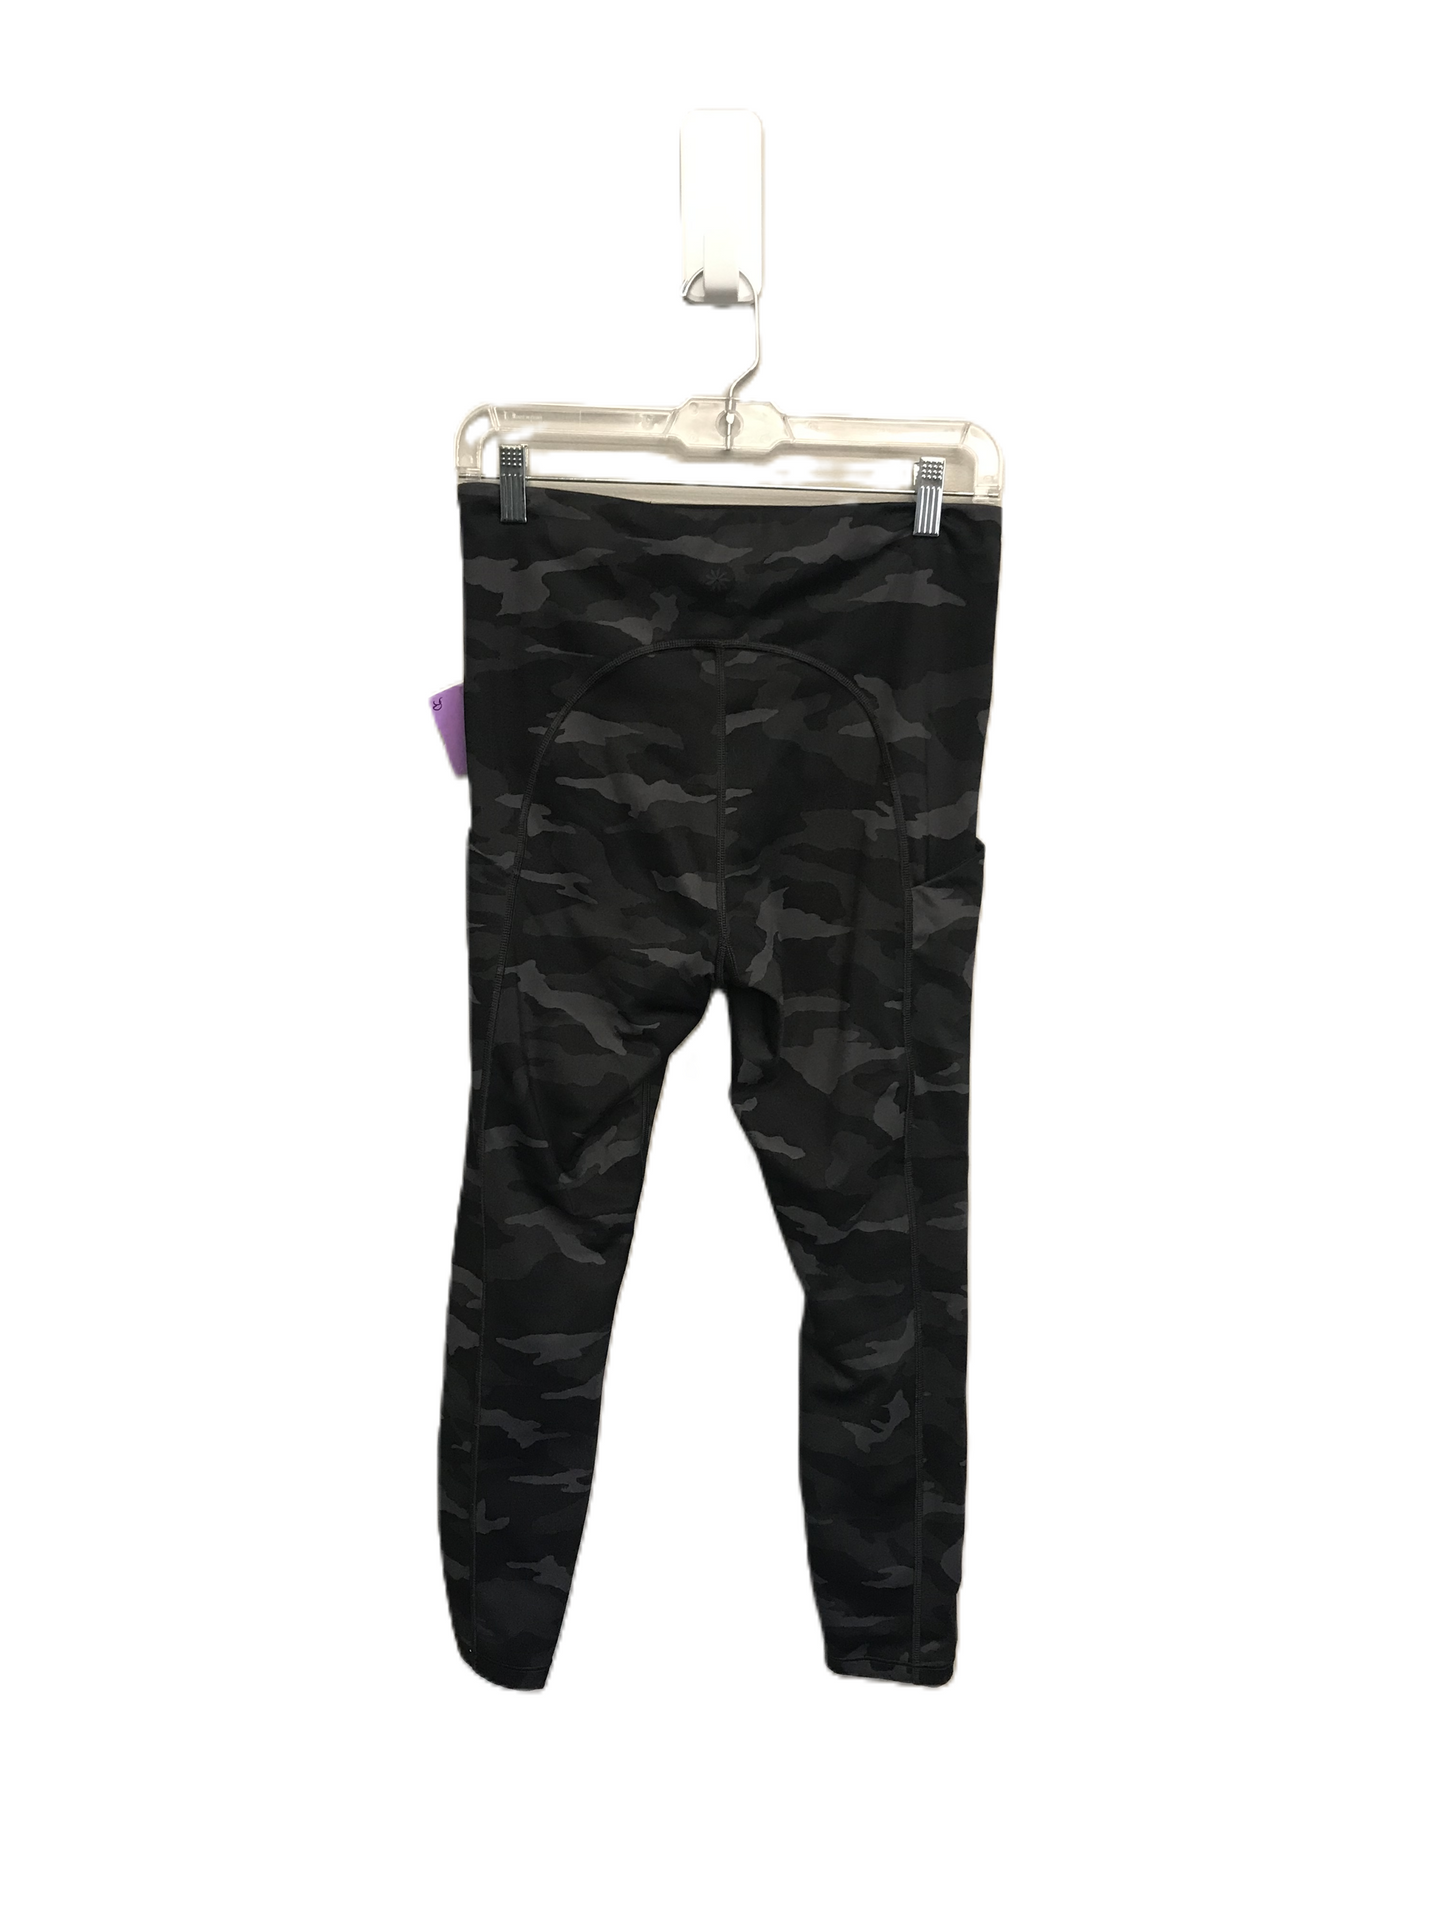 Camouflage Print Athletic Leggings By Athleta, Size: M